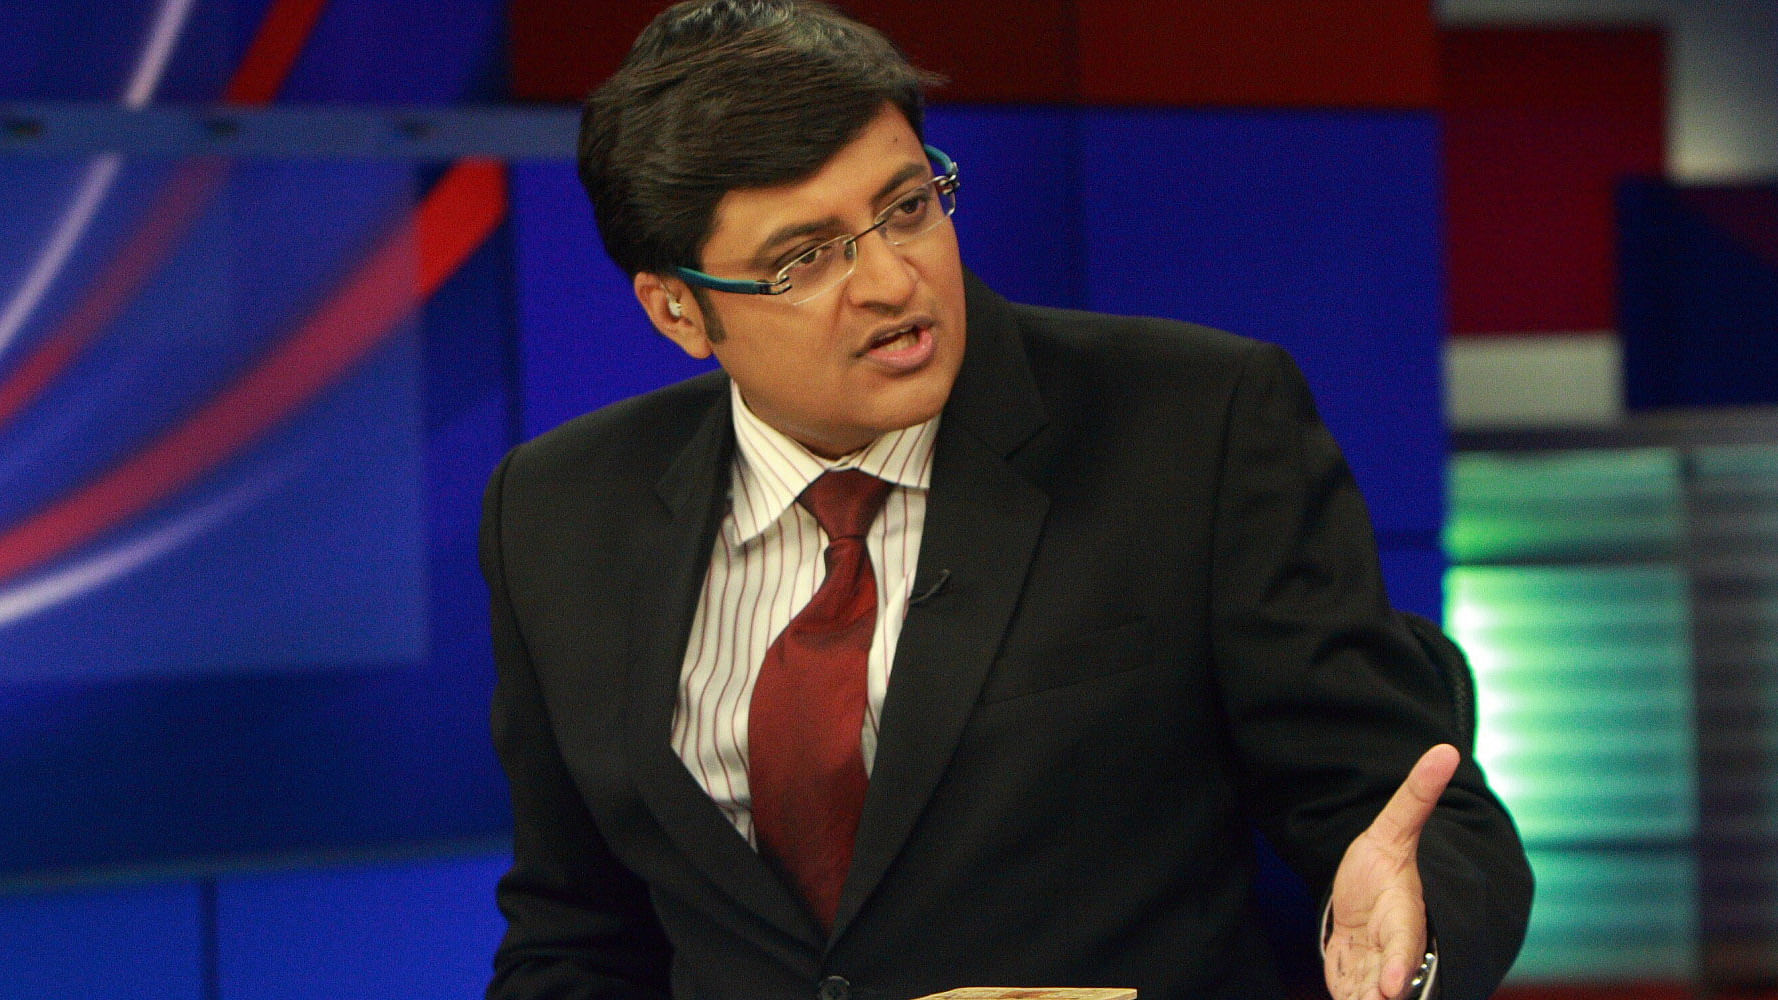 An aggressive Arnab at the Times Now studio (Photo Courtesy: <a href="http://www.youthkiawaaz.com/2016/03/arnab-goswami-is-good-for-indian-journalism/">youthkiawaaz.com</a>)